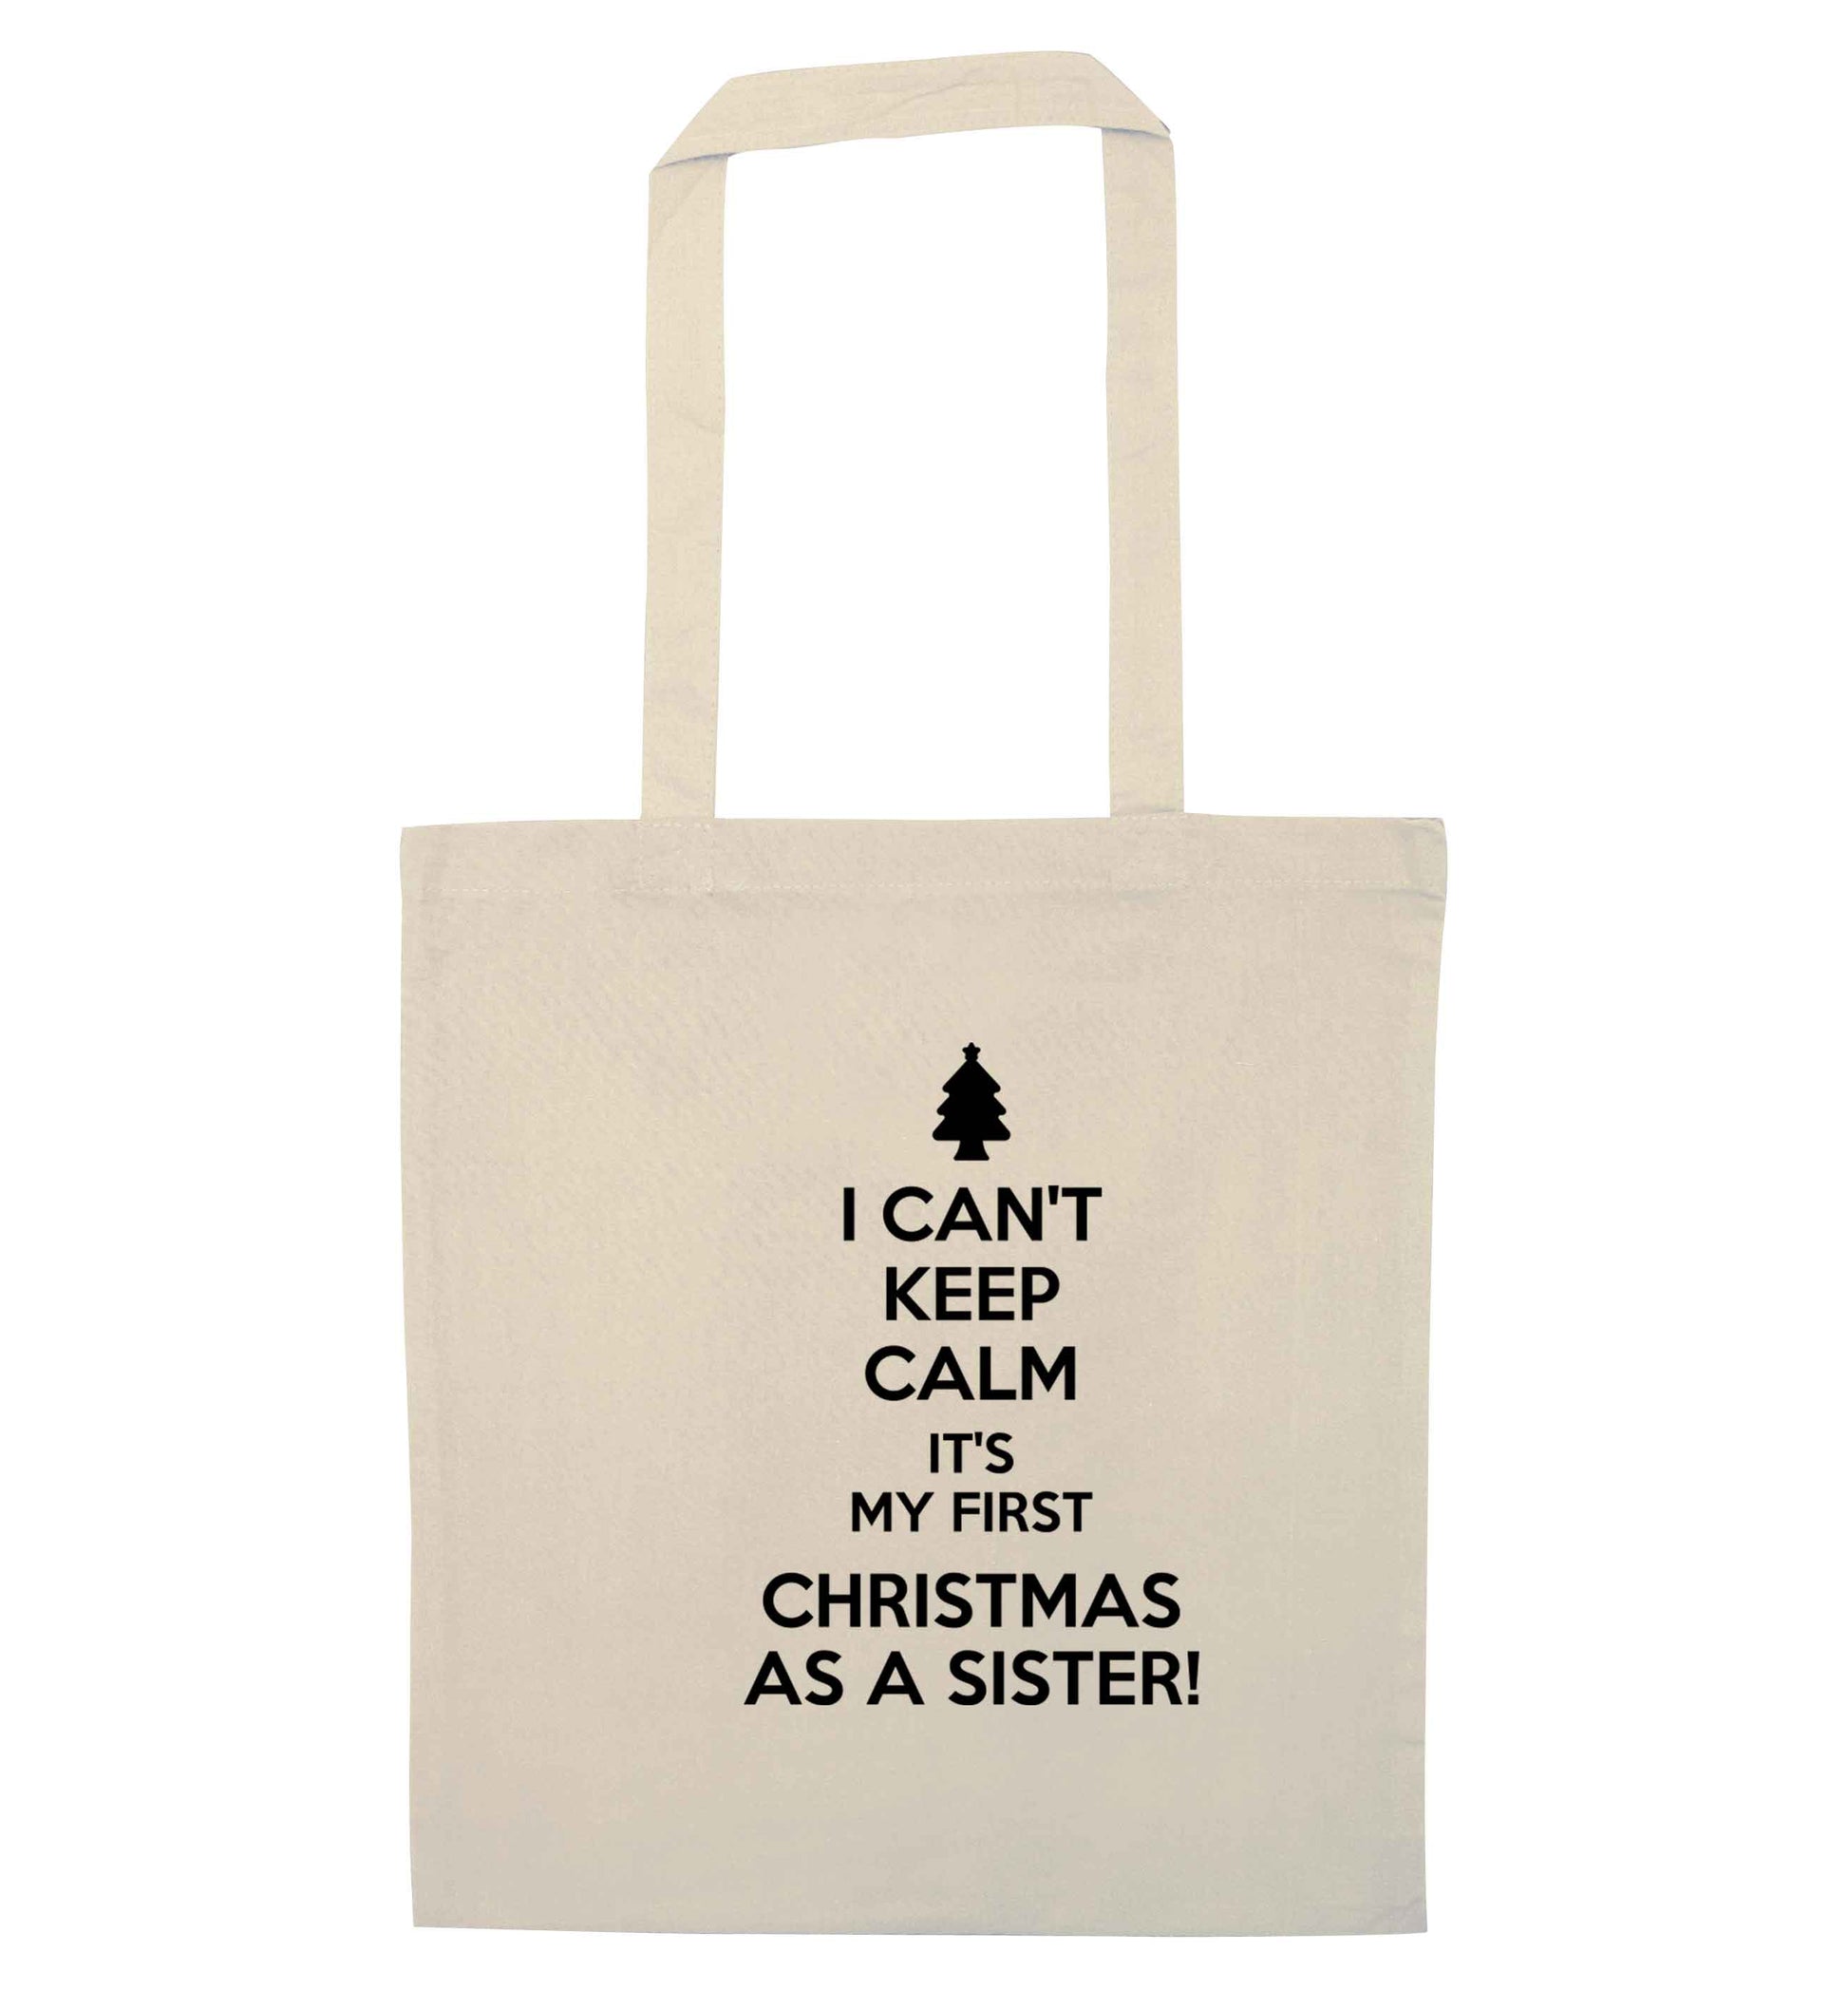 I can't keep calm it's my first Christmas as a sister! natural tote bag